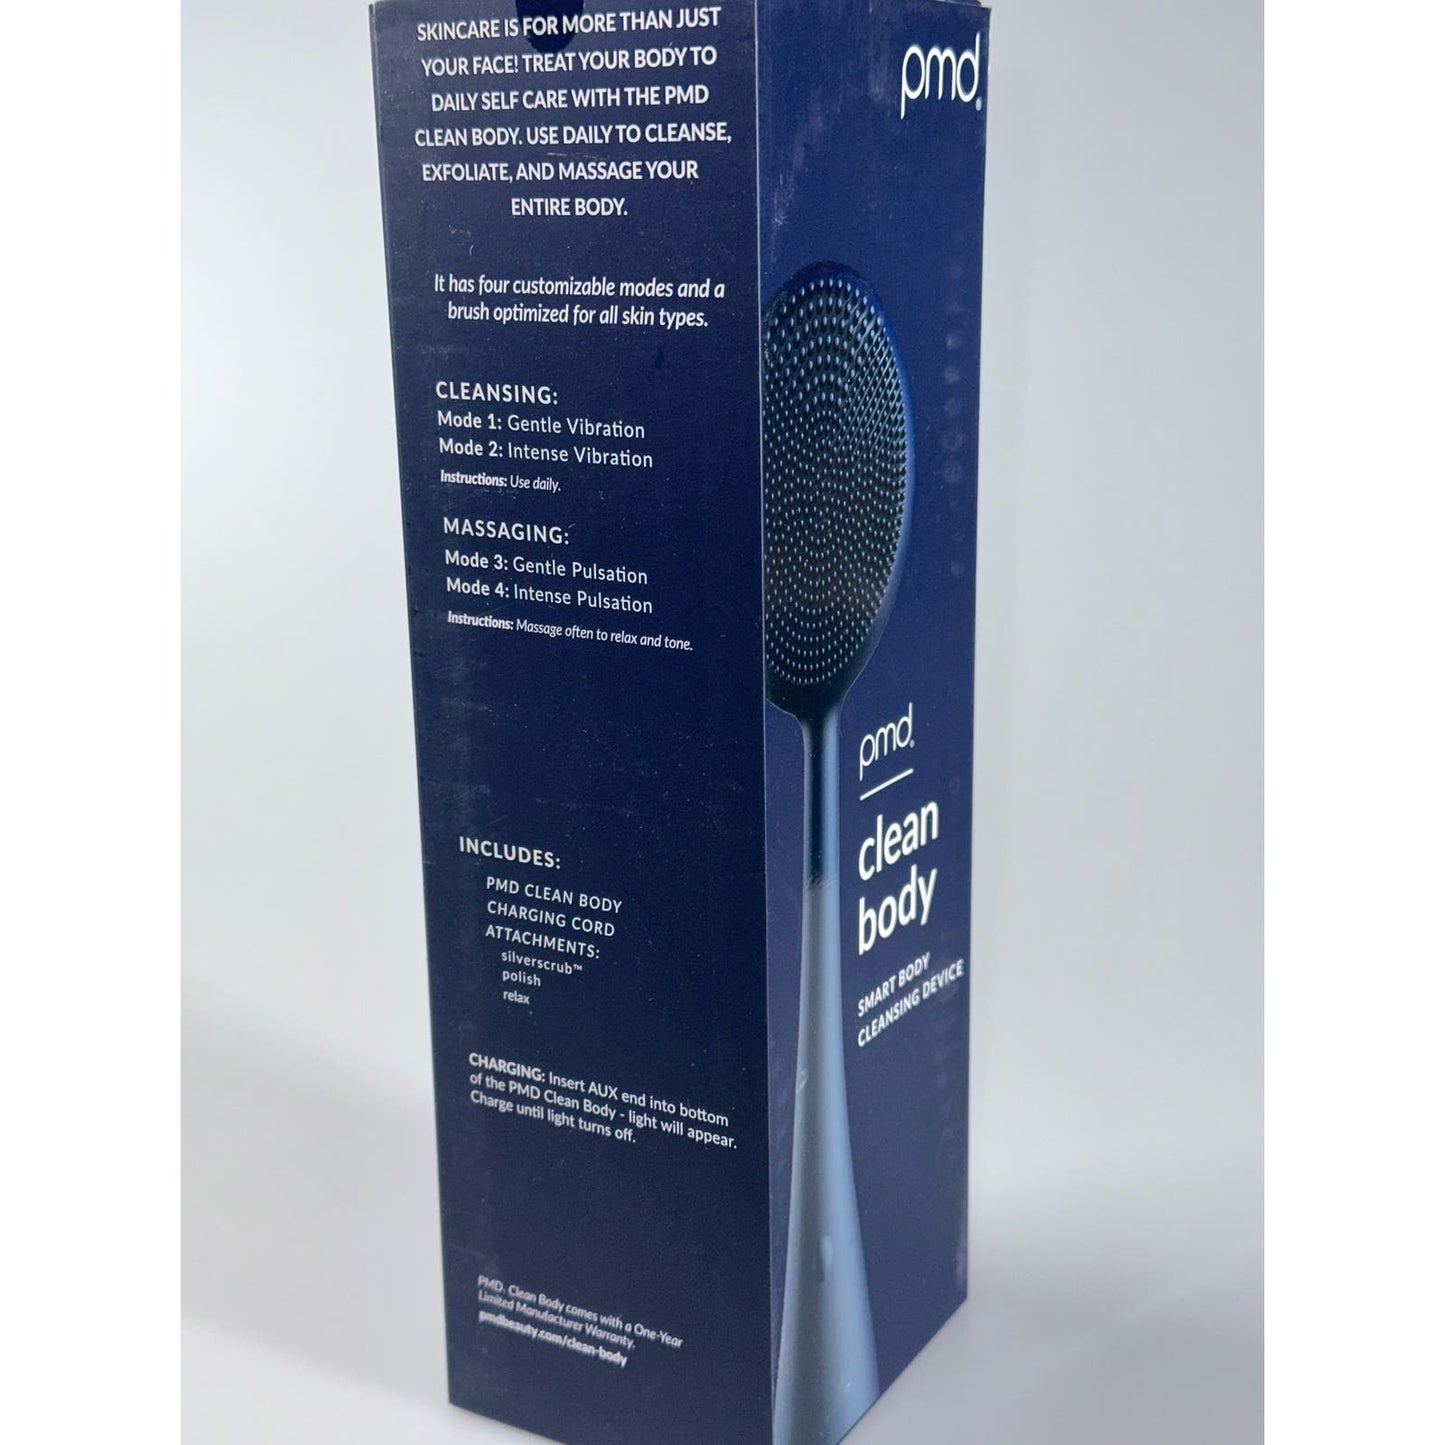 PMD Clean Body - Smart Body Cleansing Device #4033 Navy Sealed In box